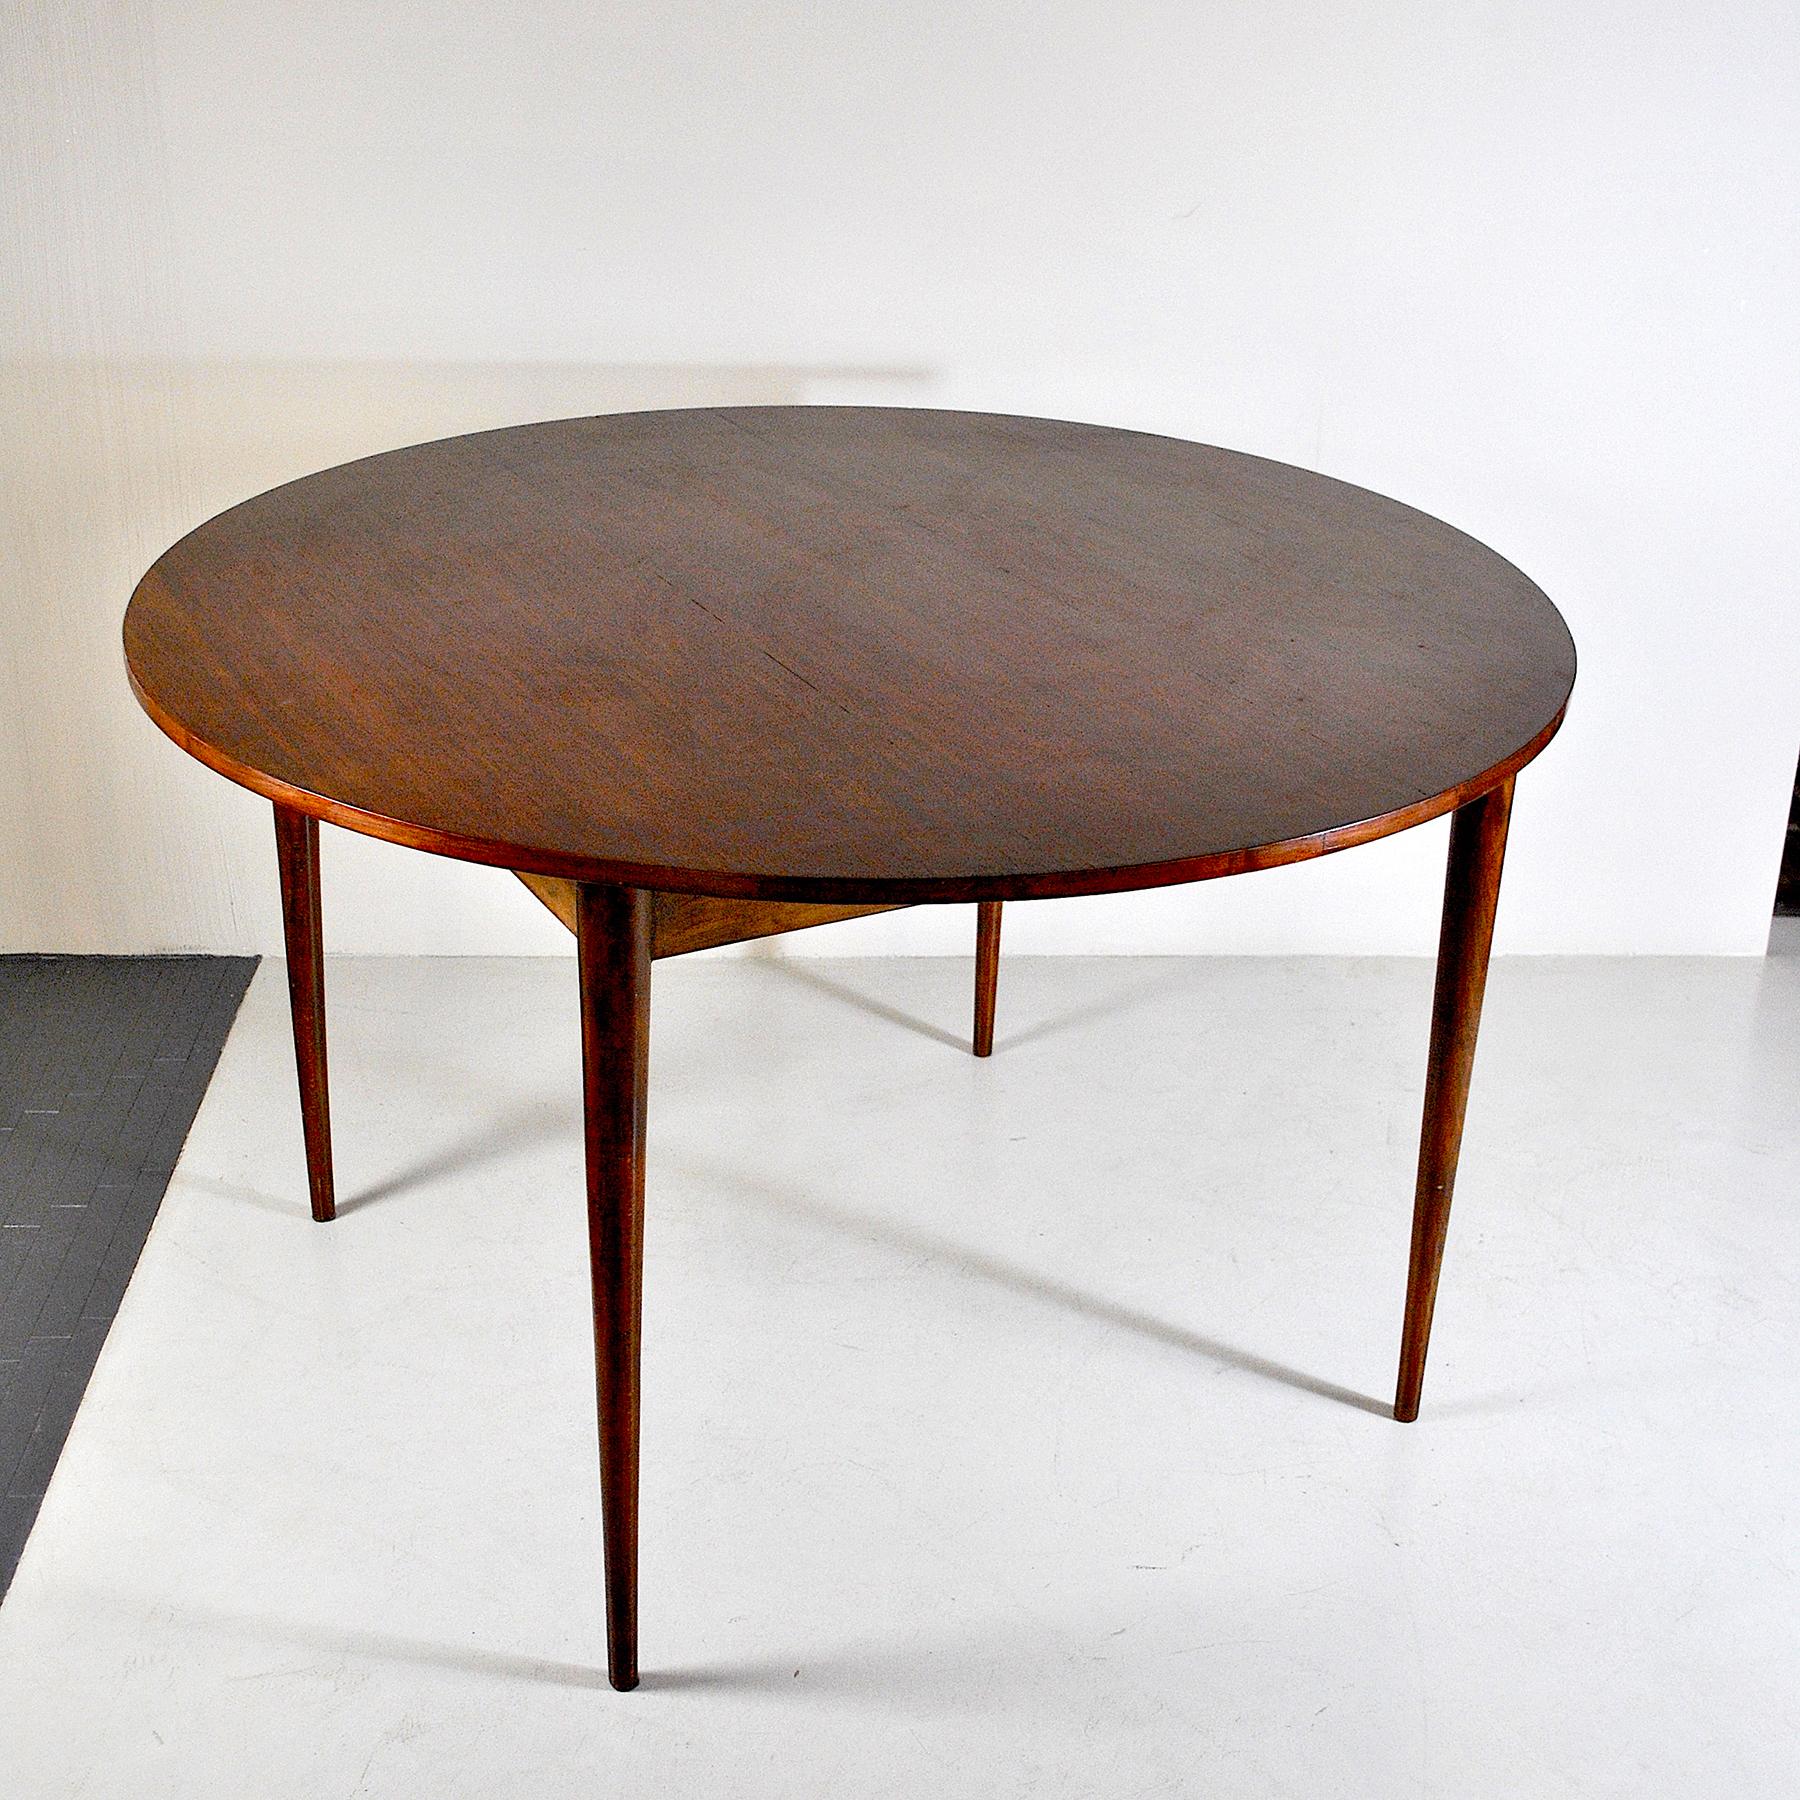 Probably the first table model flip flap by Dyrlung Smith the table can offer with the flip flap system a diameter of 190 cm max.
Name Flip Flap table due to the way its leaves extend.
The main top of this circular dining table seats 4 comfortably.